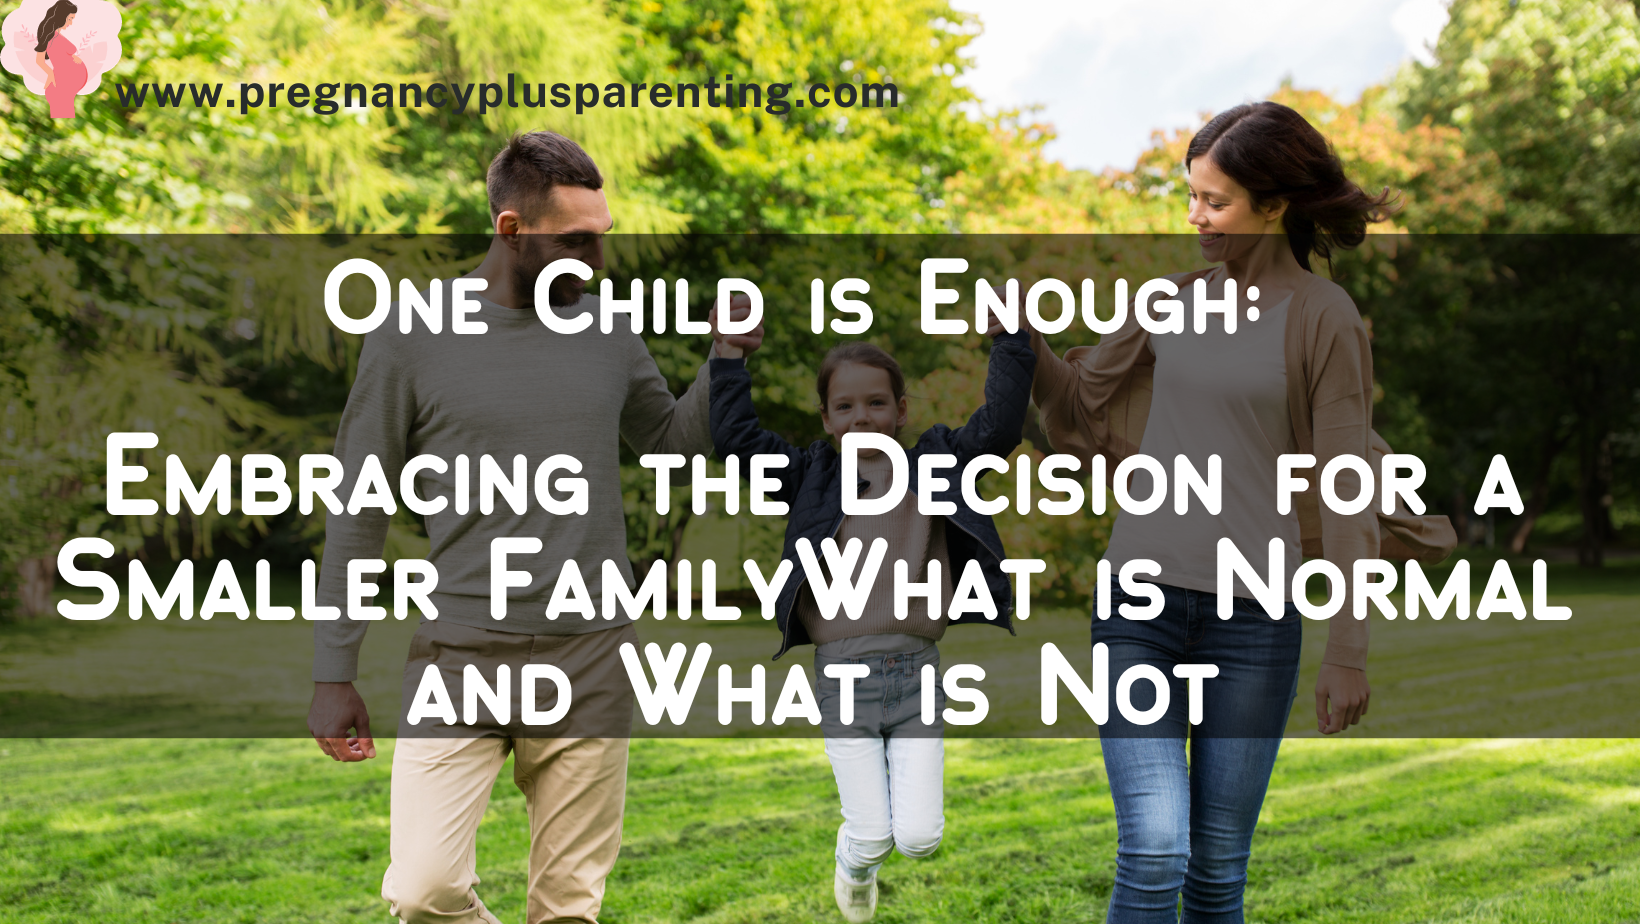 One Child is Enough: Embracing the Decision for a Smaller Family